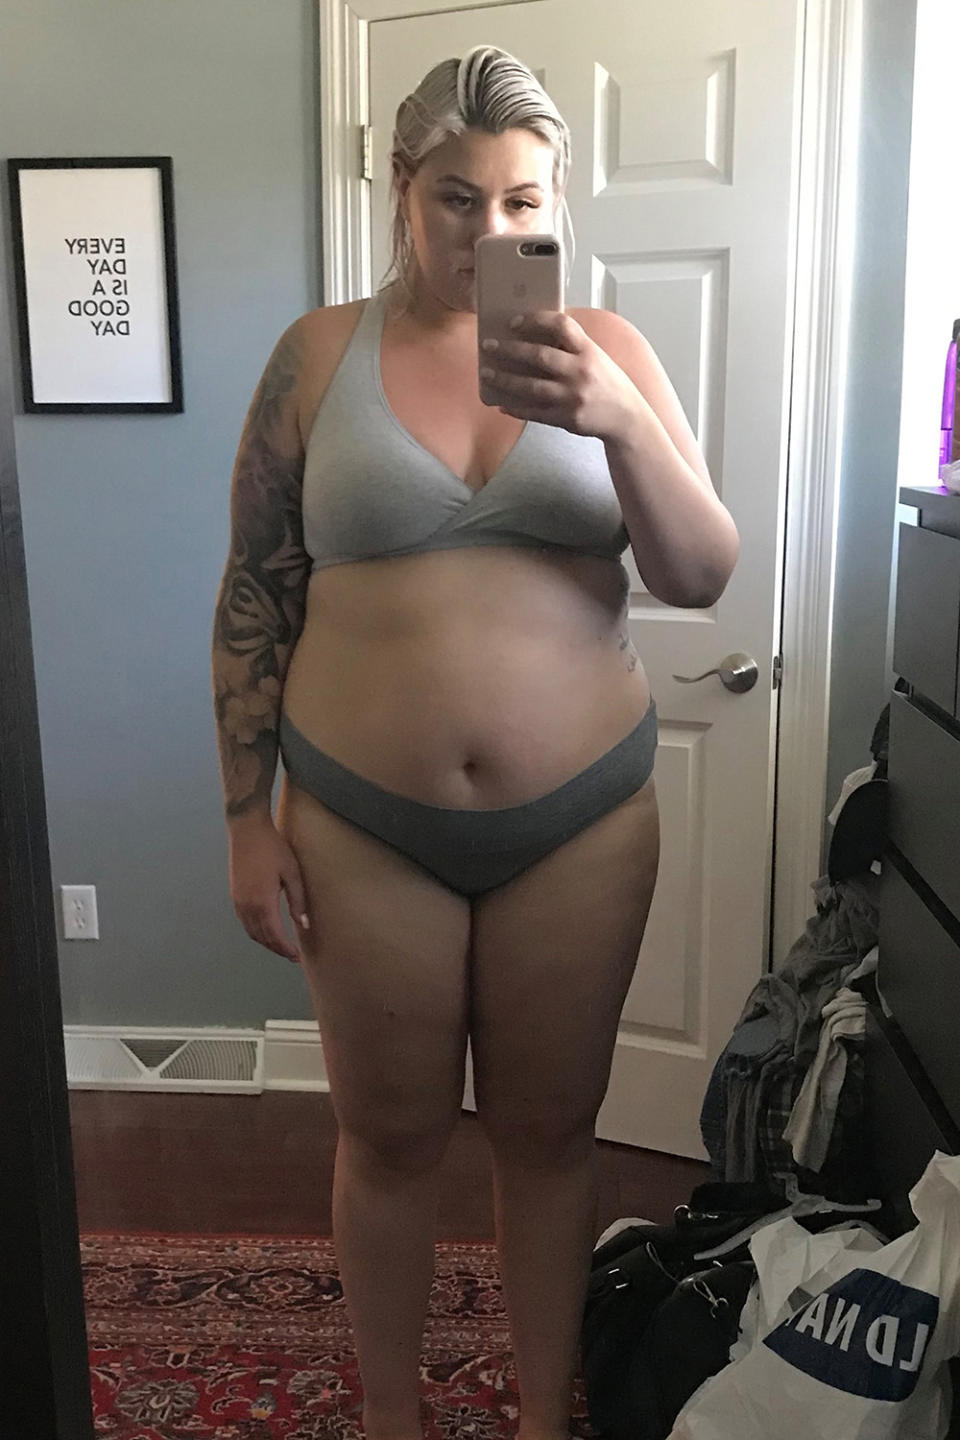 A mum has shared how she lost 57kg after being told by a sales assistant at a wedding dress shop to go to the plus-size section. Photo: @alicutsmyhair/CATERS NEWS